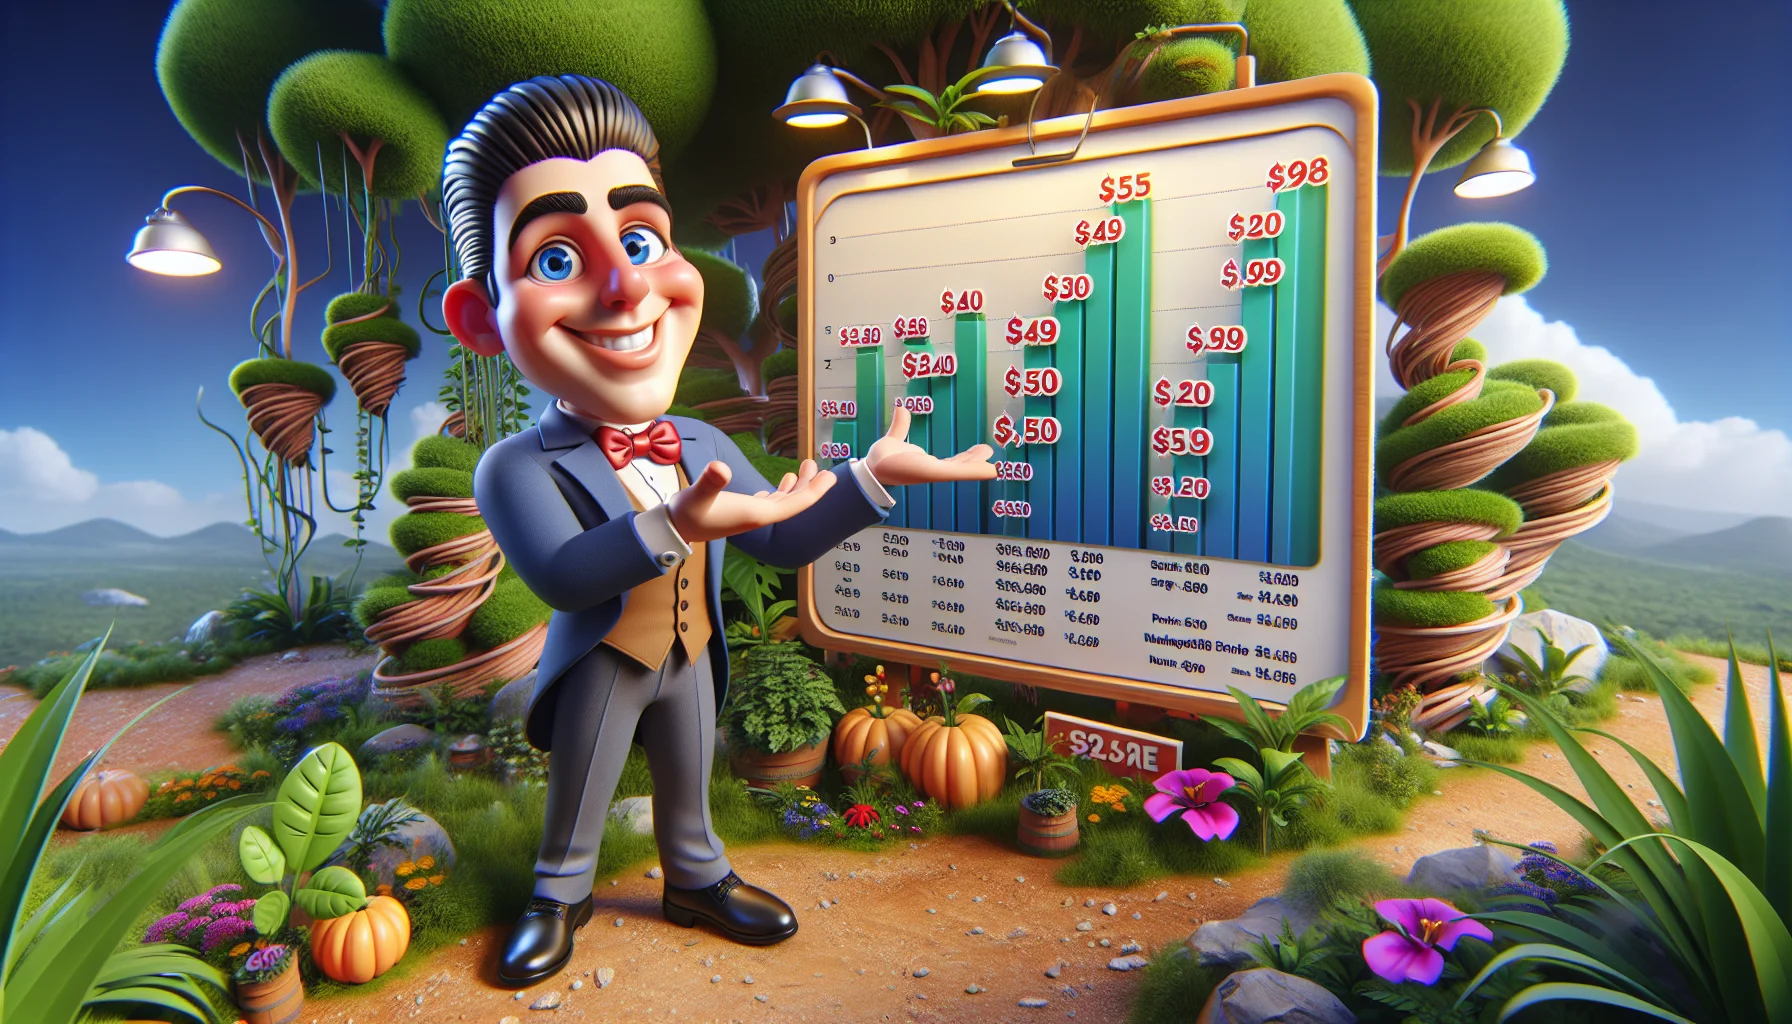 Envision a humorous scenario in a realistic setting featuring a cartoon character, reminiscent of a charming and persuading salesperson with a charismatic smile, displaying a large signboard. On the signboard, you see various layers of prices humorously portrayed as growing plants, each layer representing different aspects of web hosting services, indicating the rising costs as the features increase - a cheeky nod to the pricing system of a popular website builder service. The environment around the character is teeming with vibrant colors, creating a playful and enticing atmosphere.